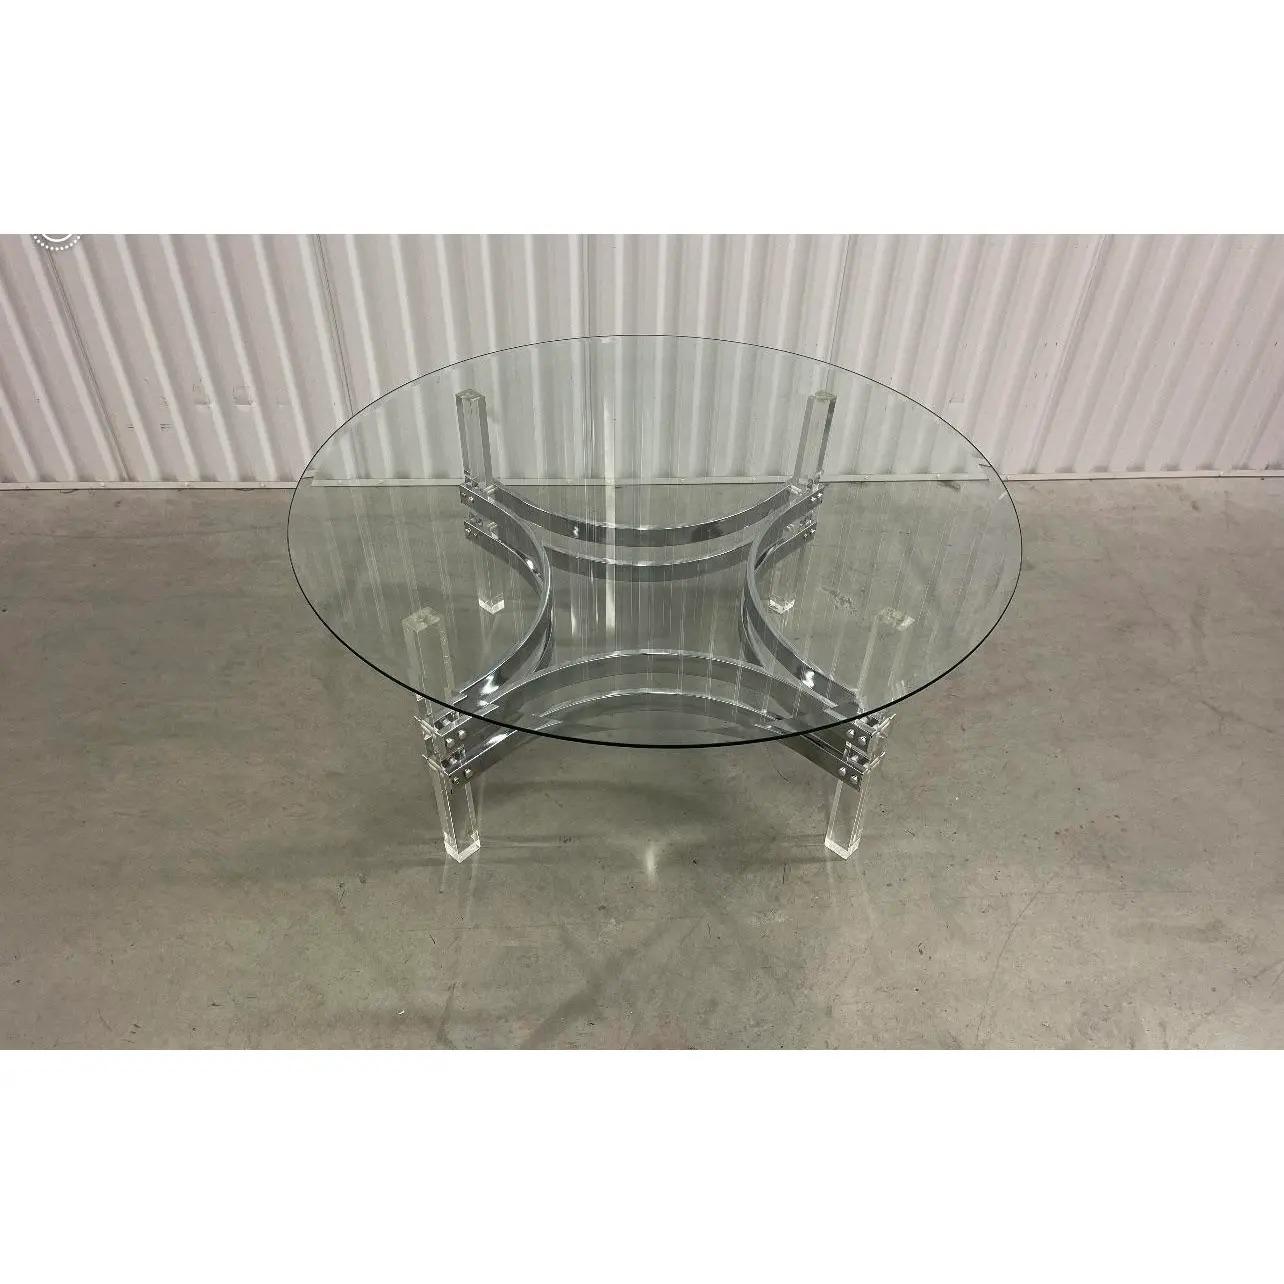 This beautiful 1970s Charles Hollis Jones style chrome and lucite coffee table is the perfect centerpiece for your home or office.